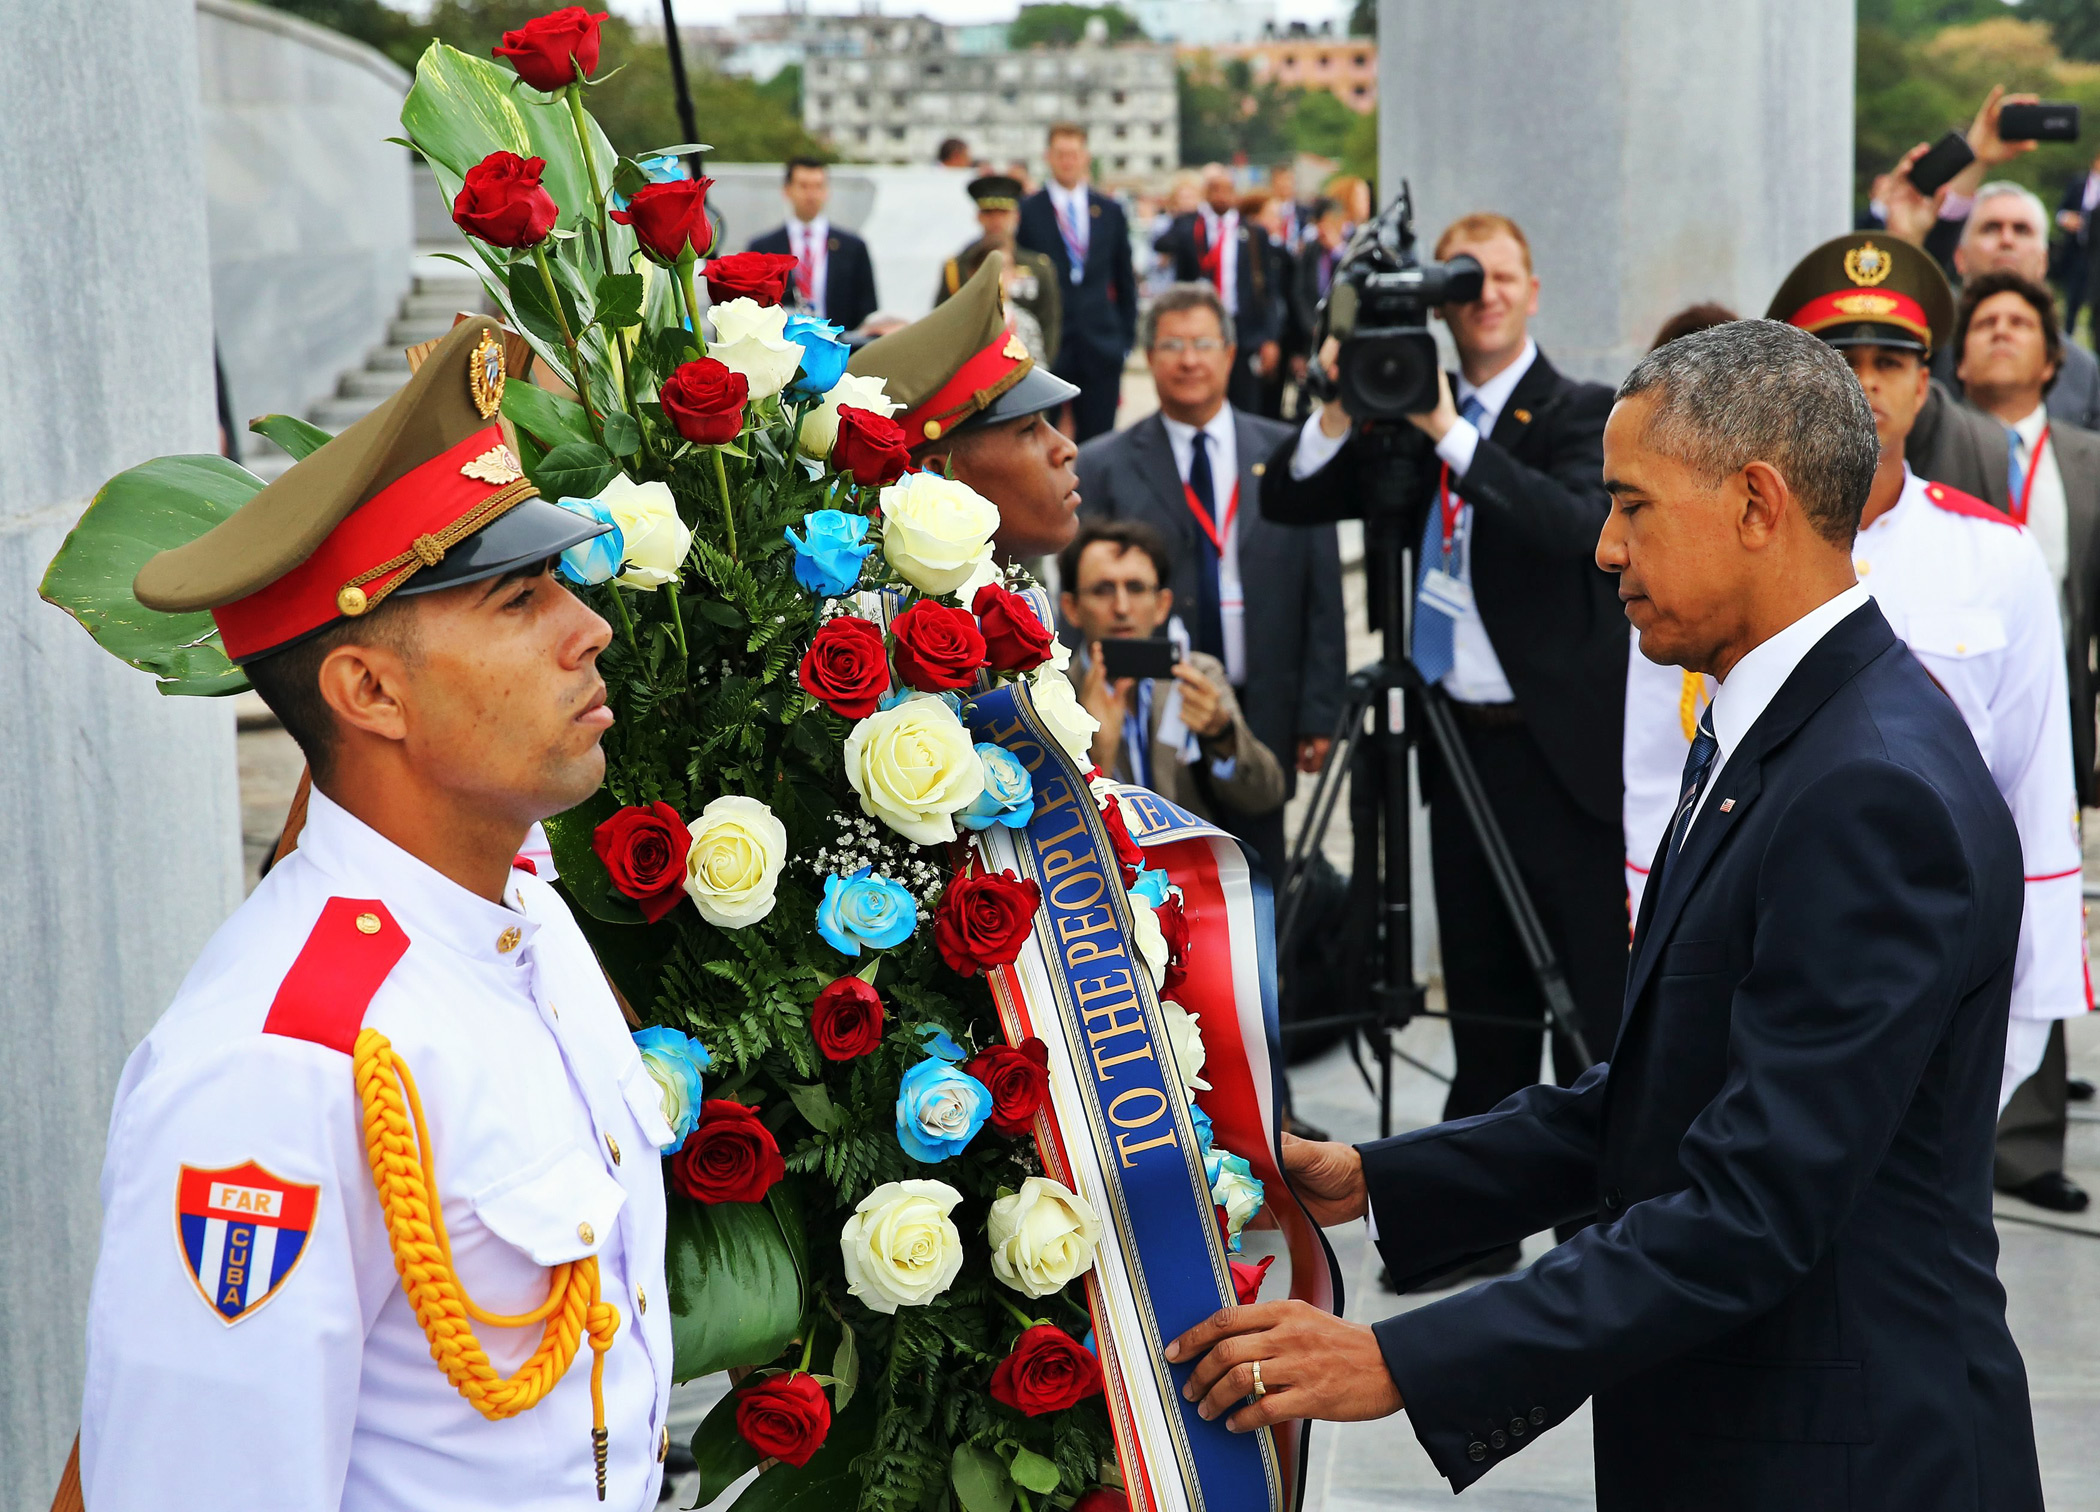 President Barack Obama lays a wreath for Cuban hero Jose Marti at Revolution Square in Havana, on March 21, 2016.